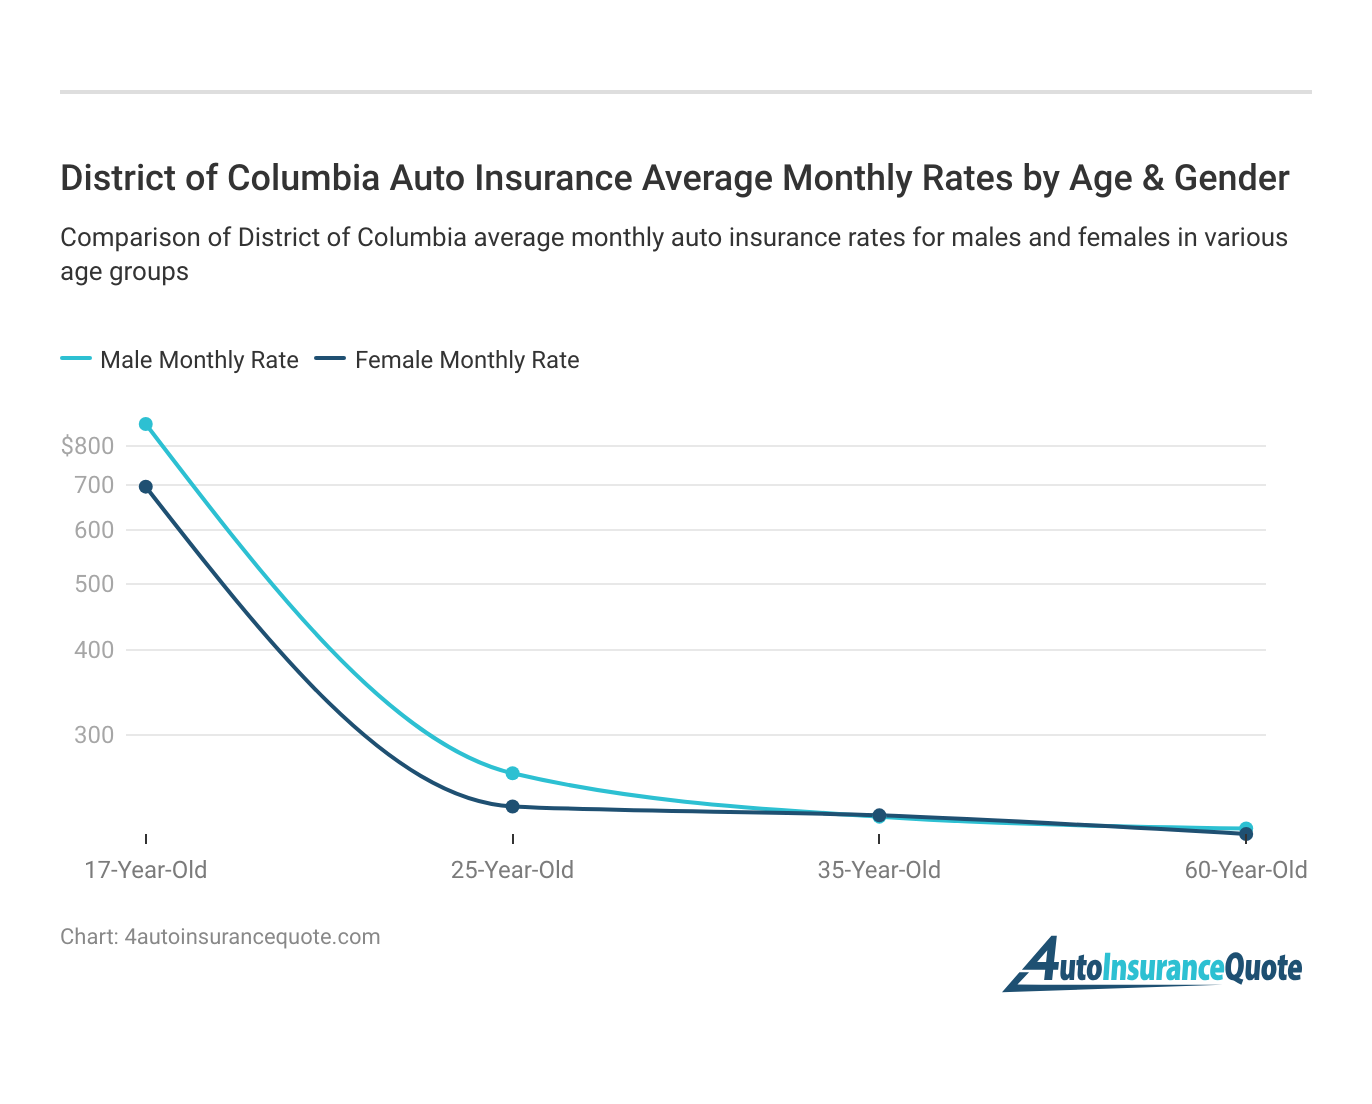 <h3>District of Columbia Auto Insurance Average Monthly Rates by Age & Gender</h3>